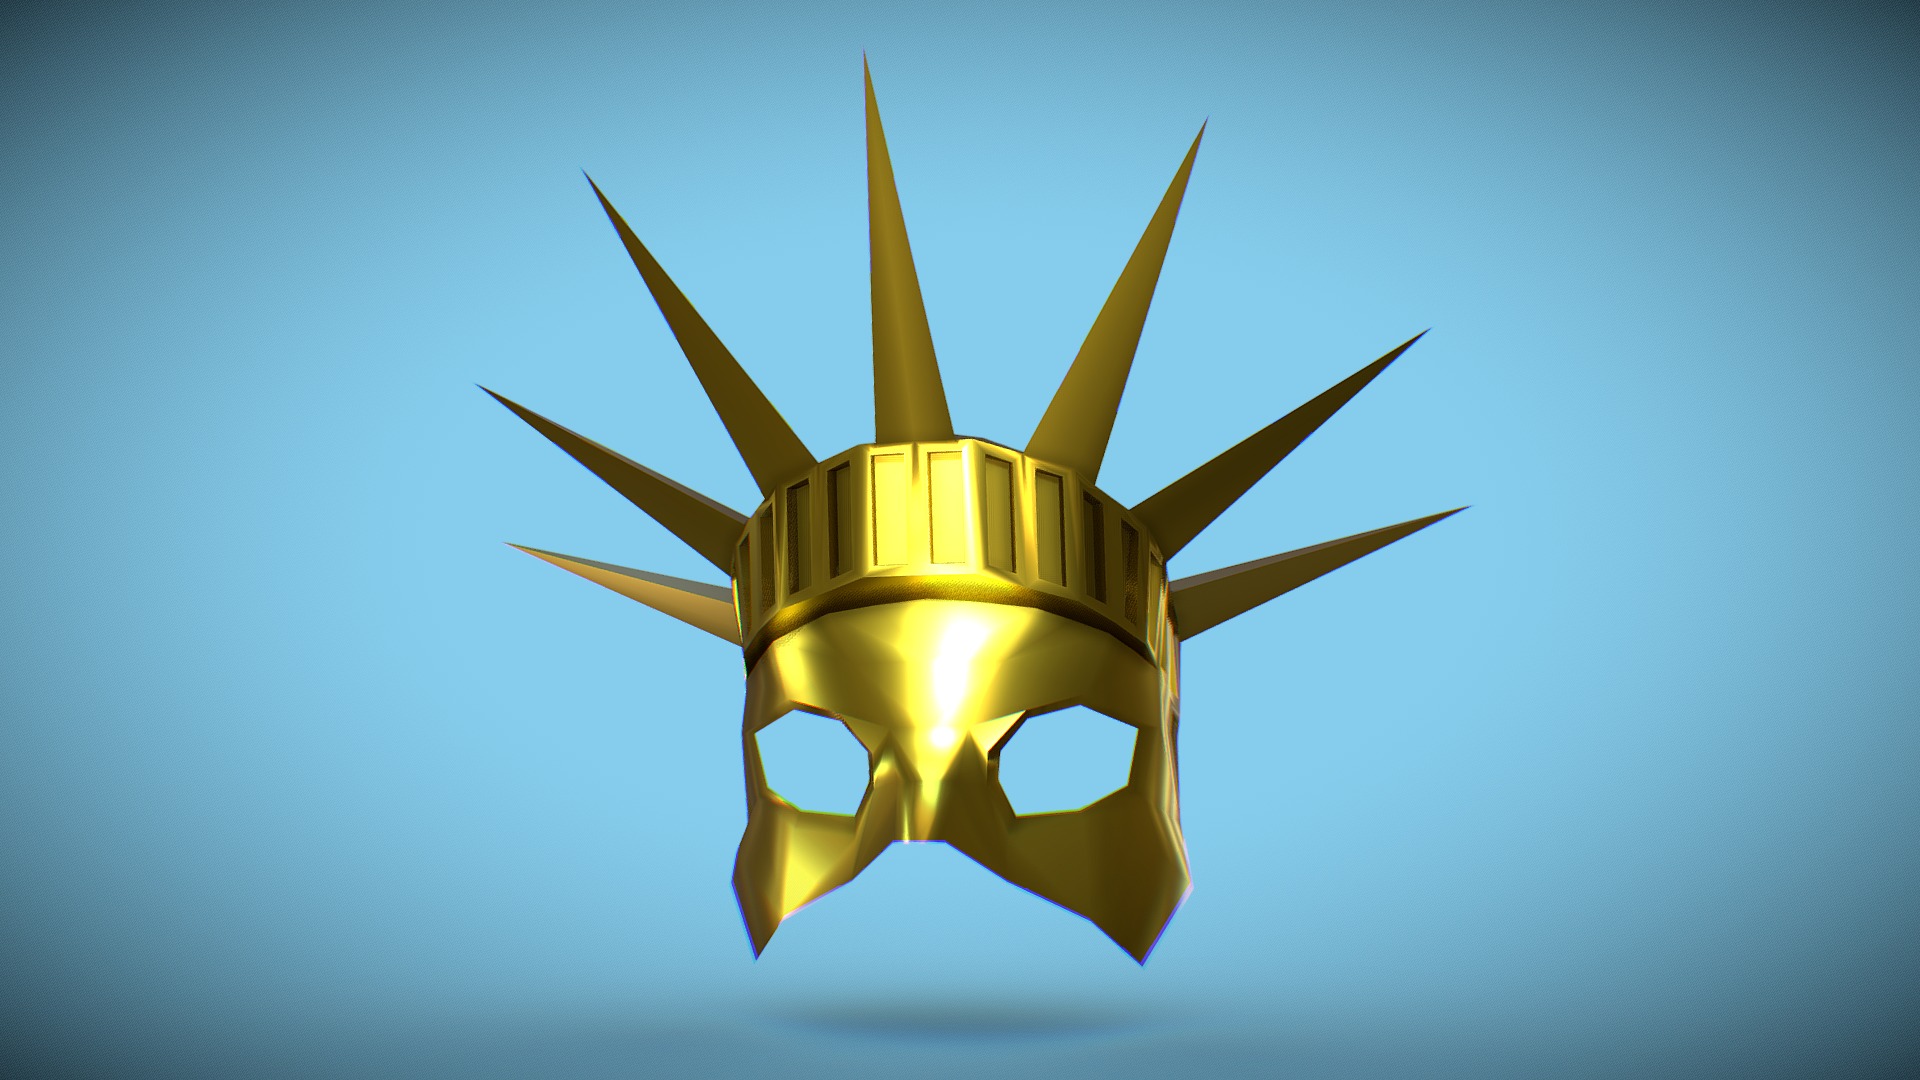 3D model Liberty Mask - This is a 3D model of the Liberty Mask. The 3D model is about a yellow star with a blue background.